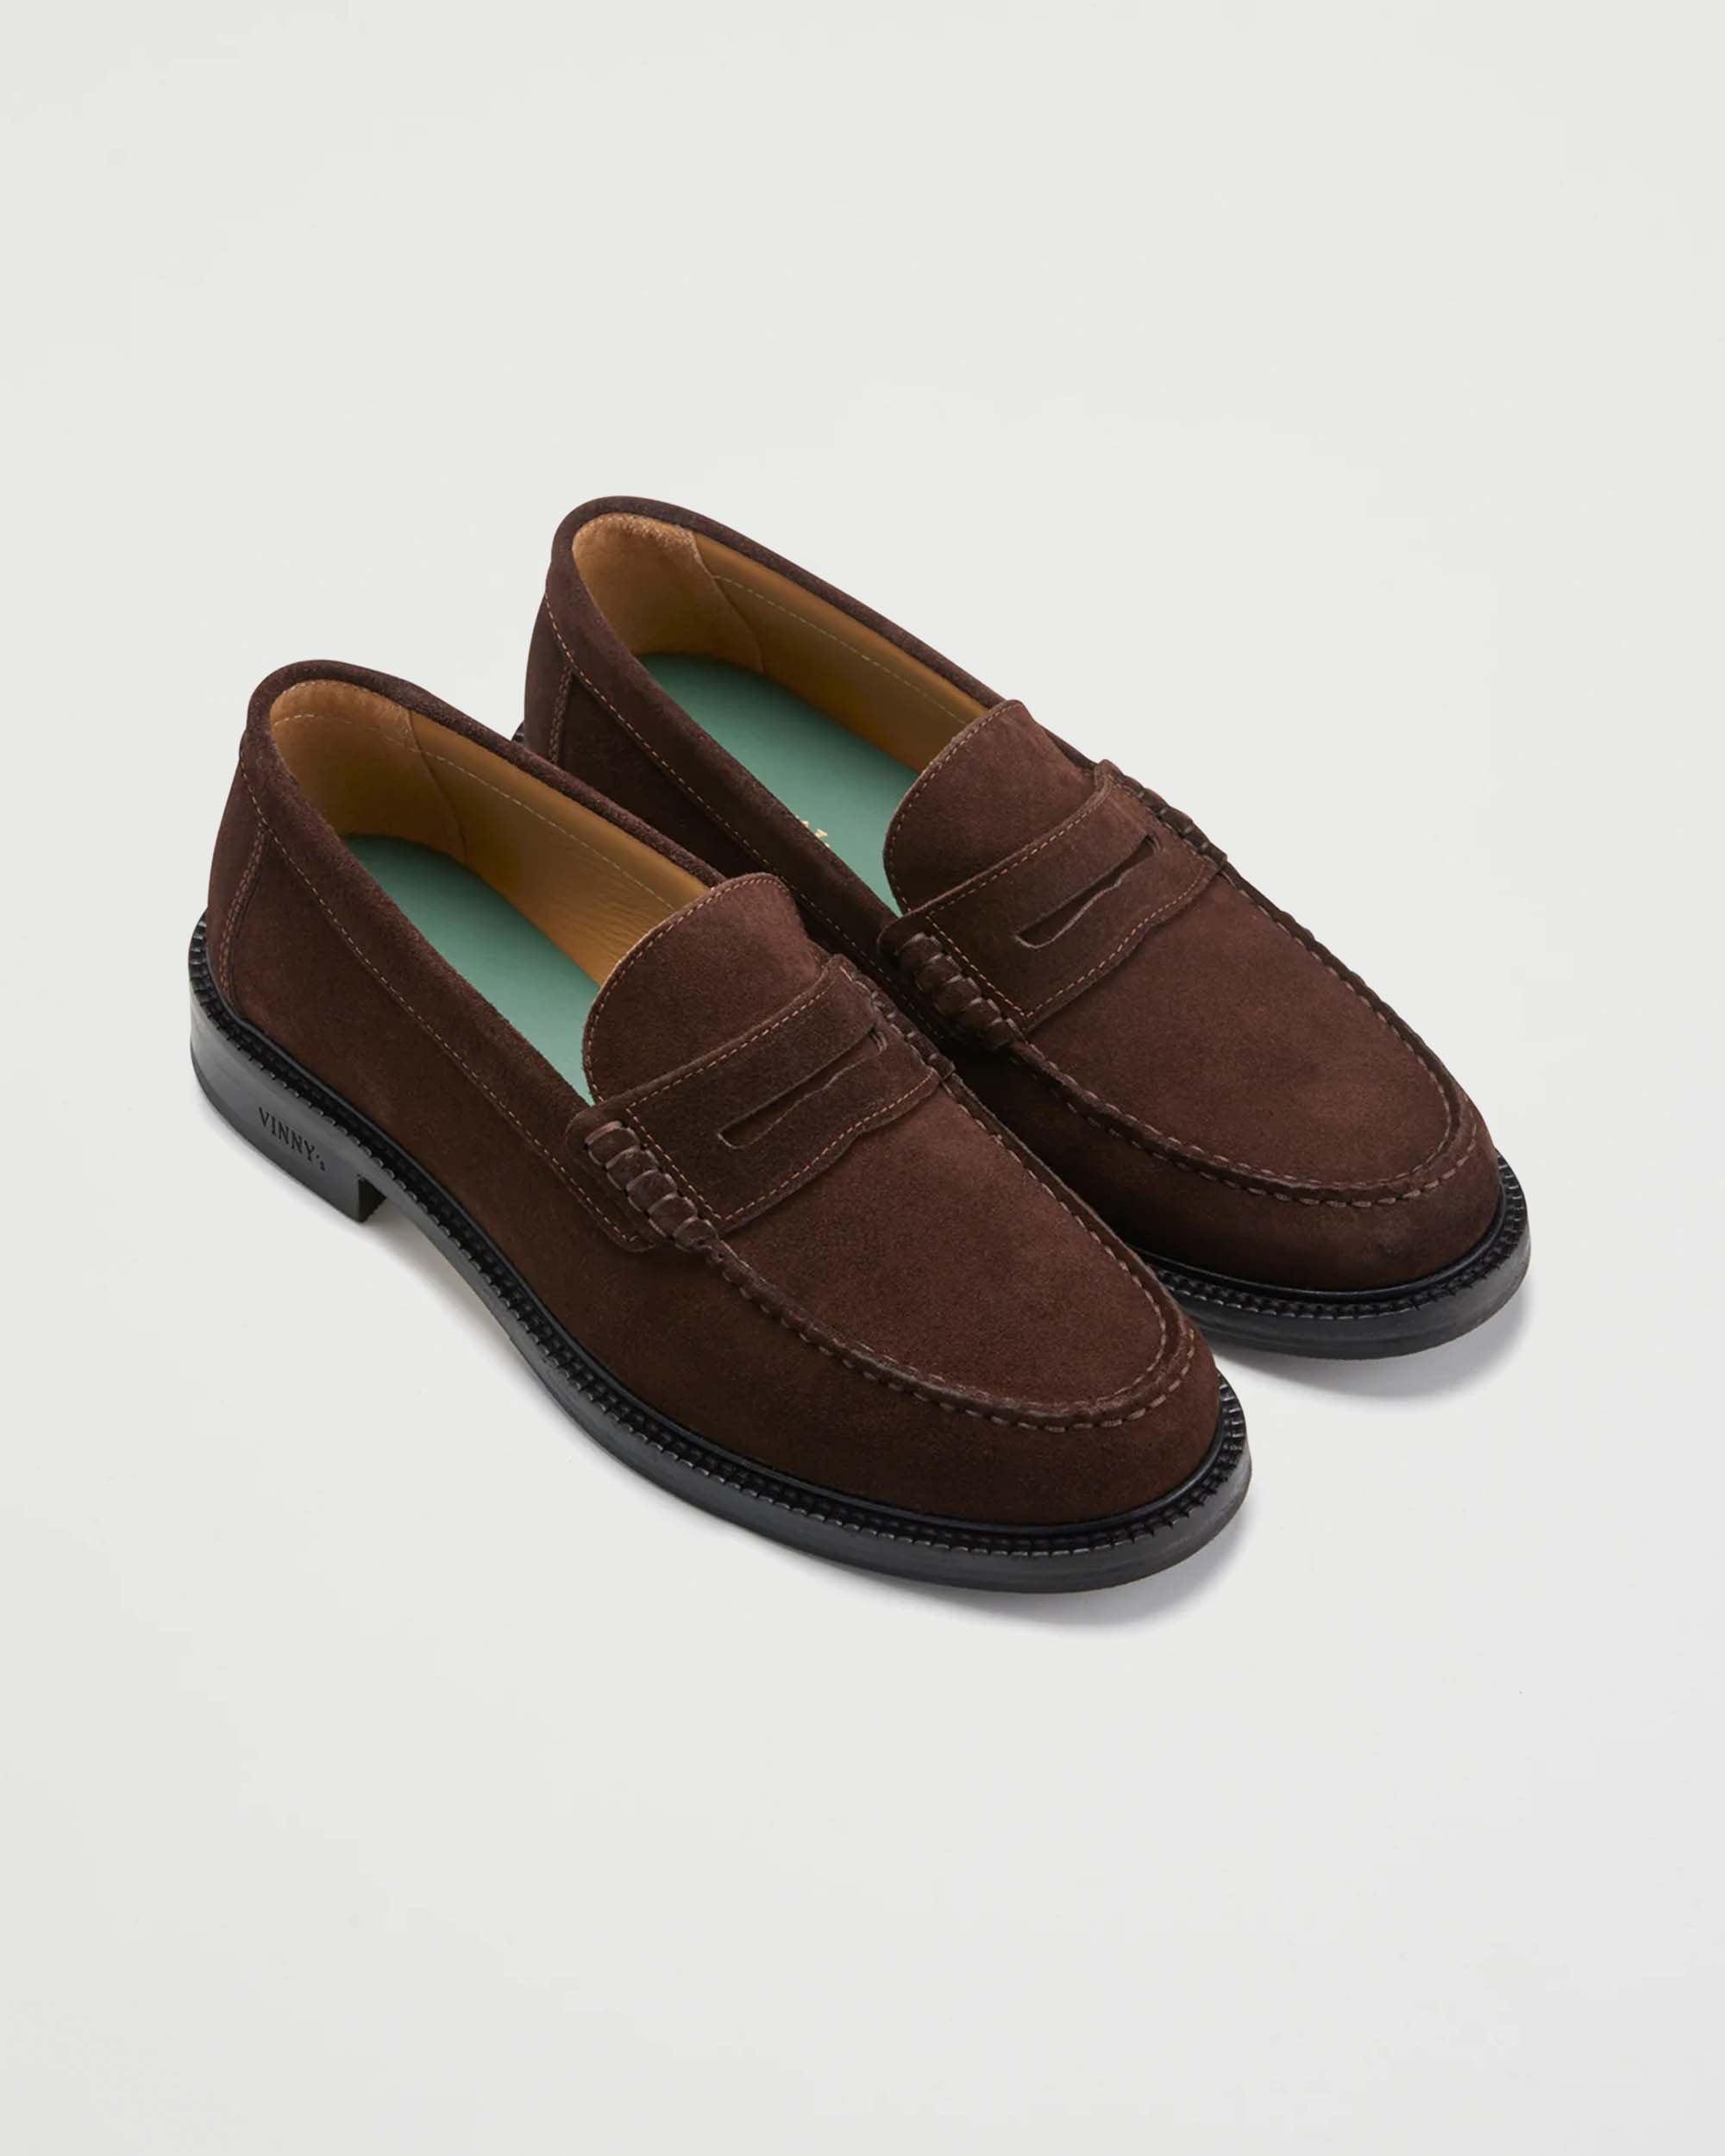 VINNY's Yardee Mocassin Loafer Chocolate Brown Suede Shoes Leather Unisex